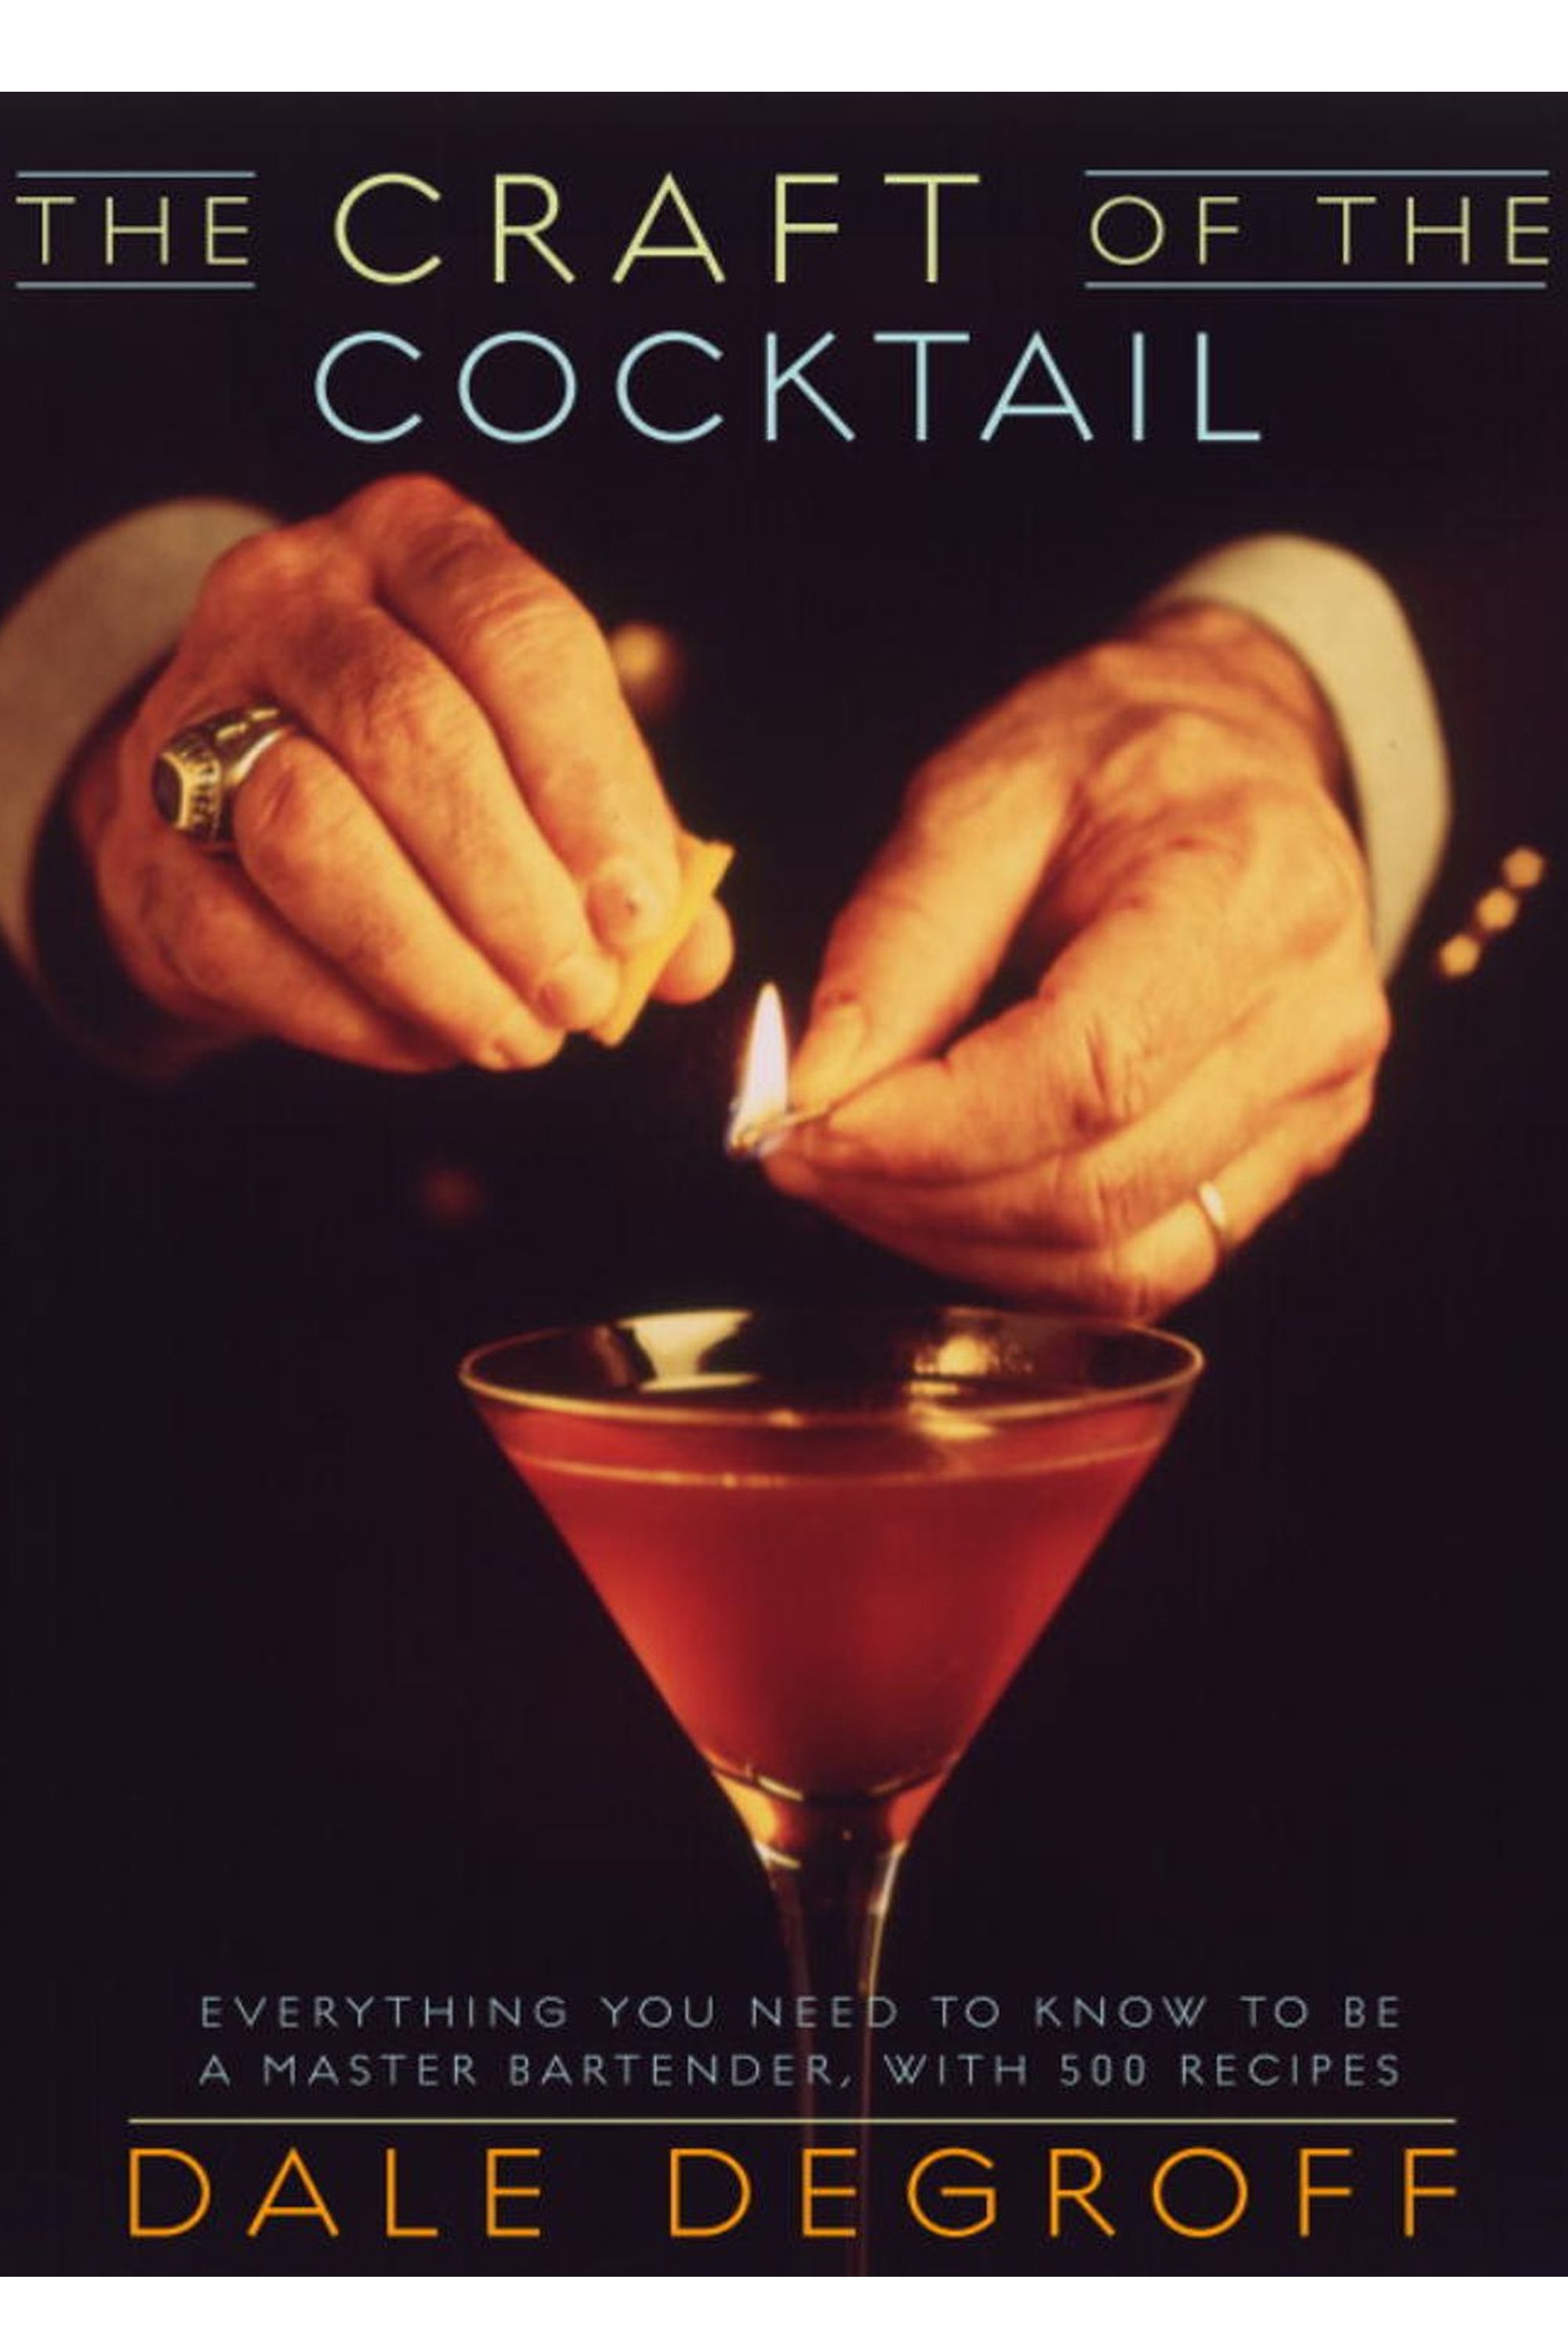 The Craft of the Cocktail by Dale Degroff